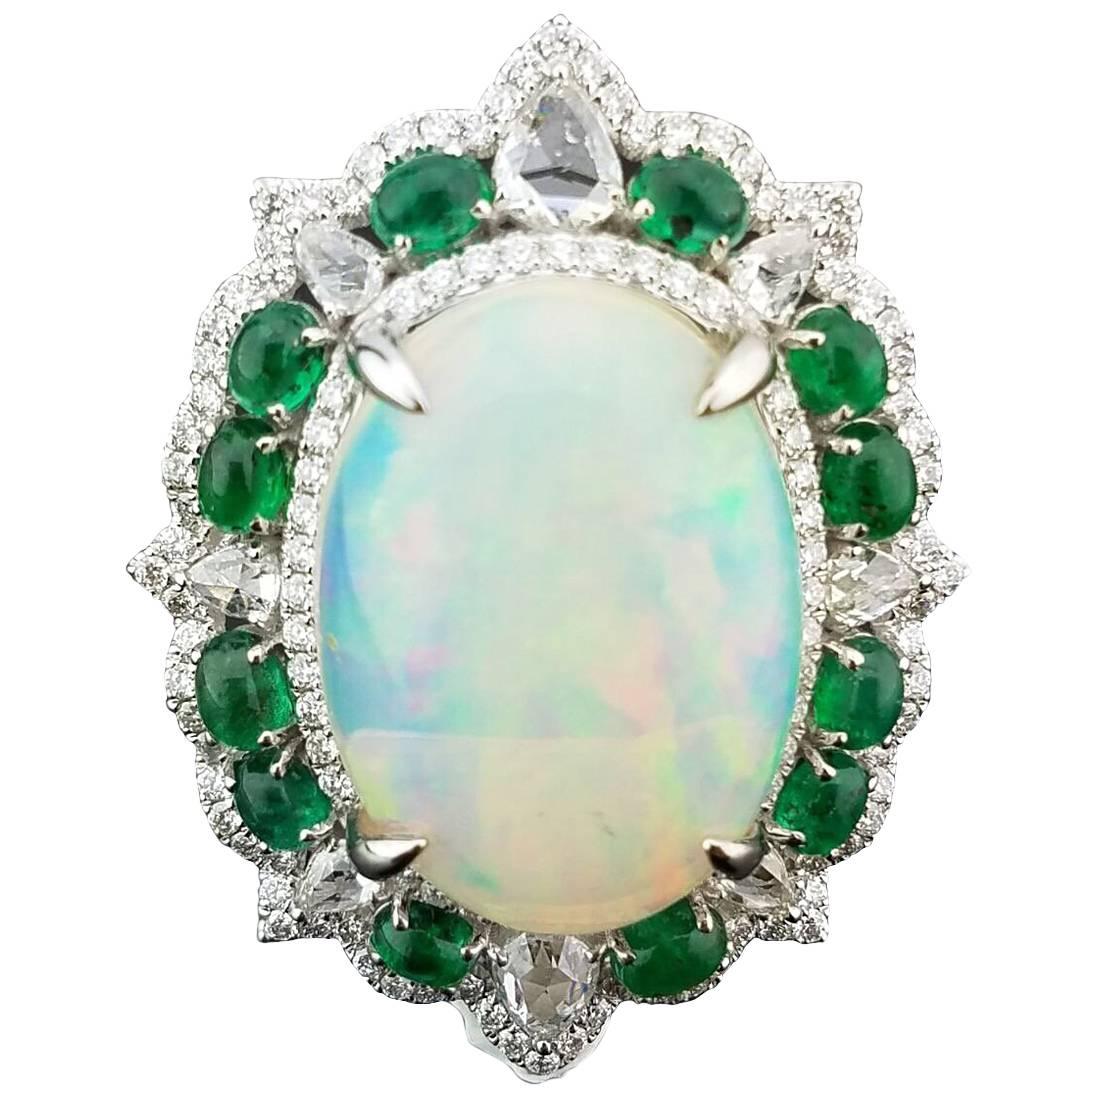 10.66 Carat Cabochon Opal, Emerald and Diamond Cocktail Ring